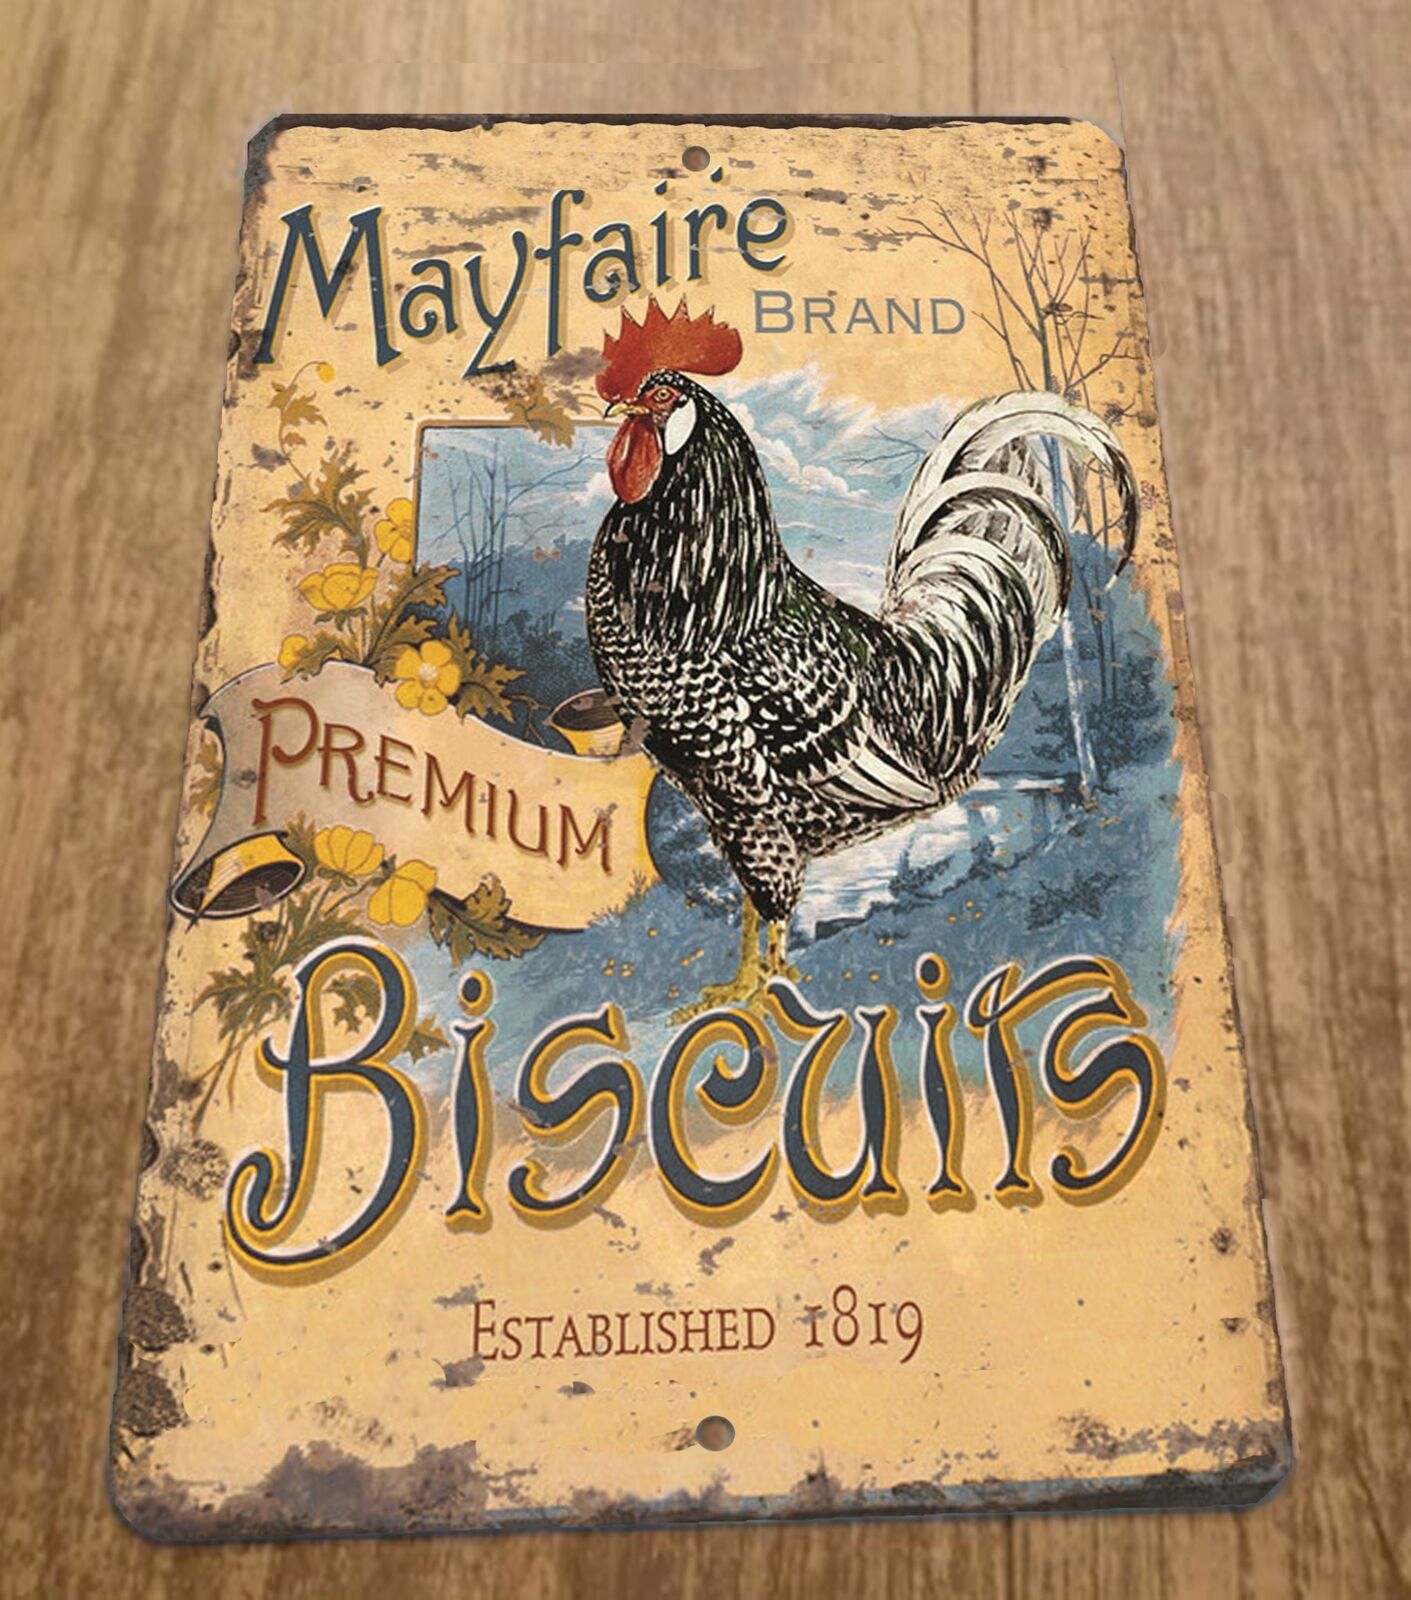 Mayfair Premium Biscuits Vintage Ad Chicken Rooster 8x12 Metal Wall Animal Sign